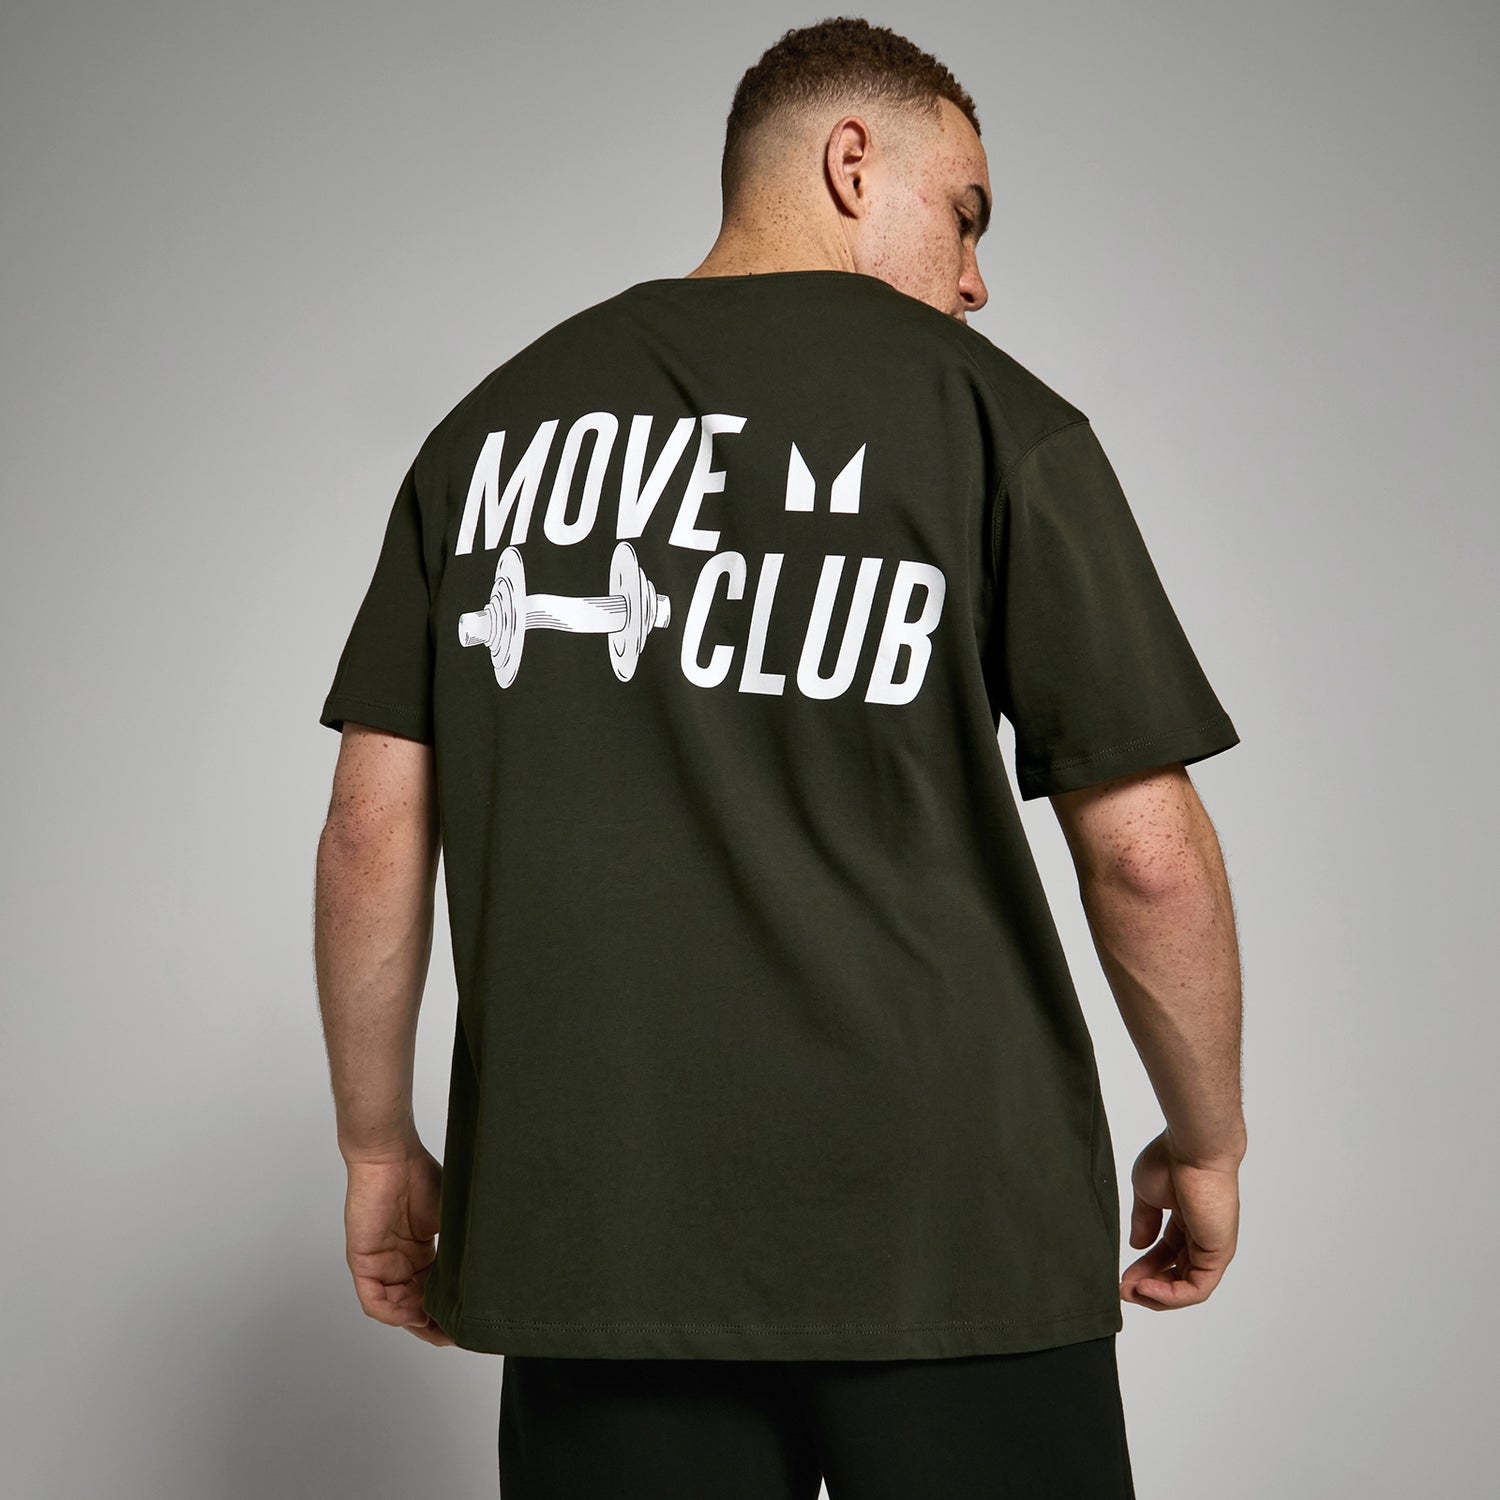 MP Oversized Move Club T-Shirt - Forest Green - XXS - XS